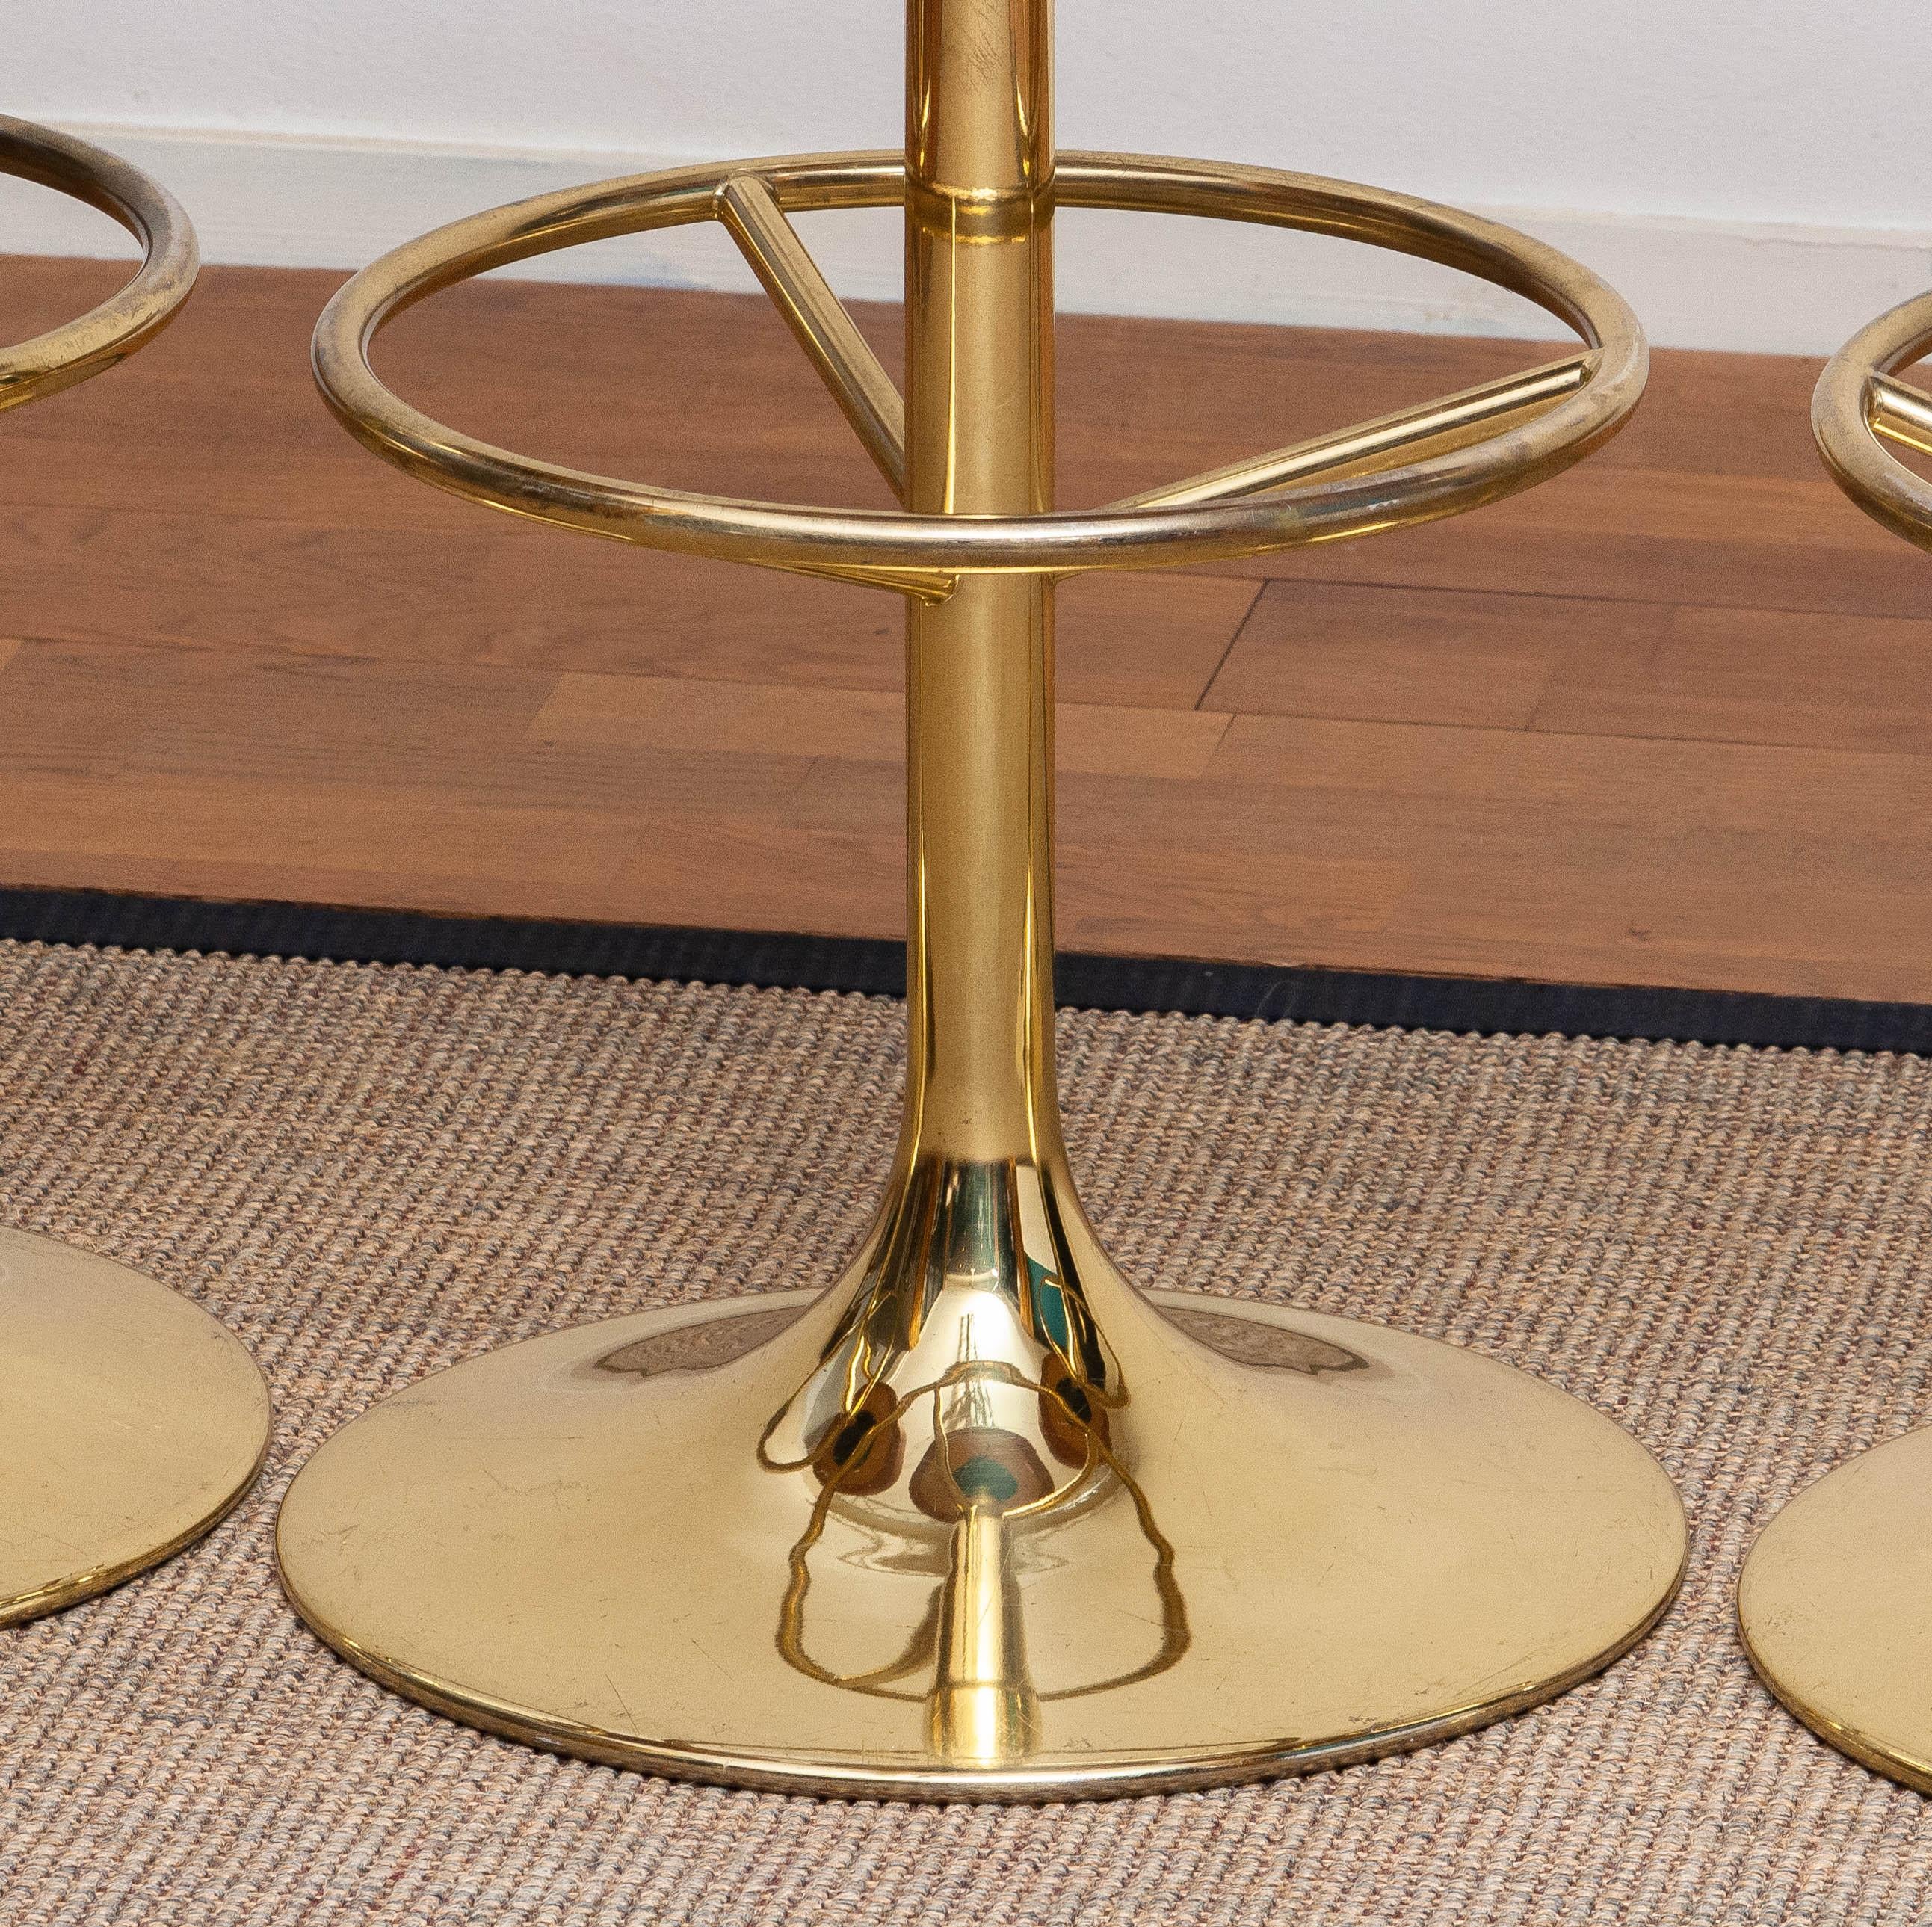 1970s, Set of Three Bar Stools in Brass / Gold by Johanson Design for Markaryd 1